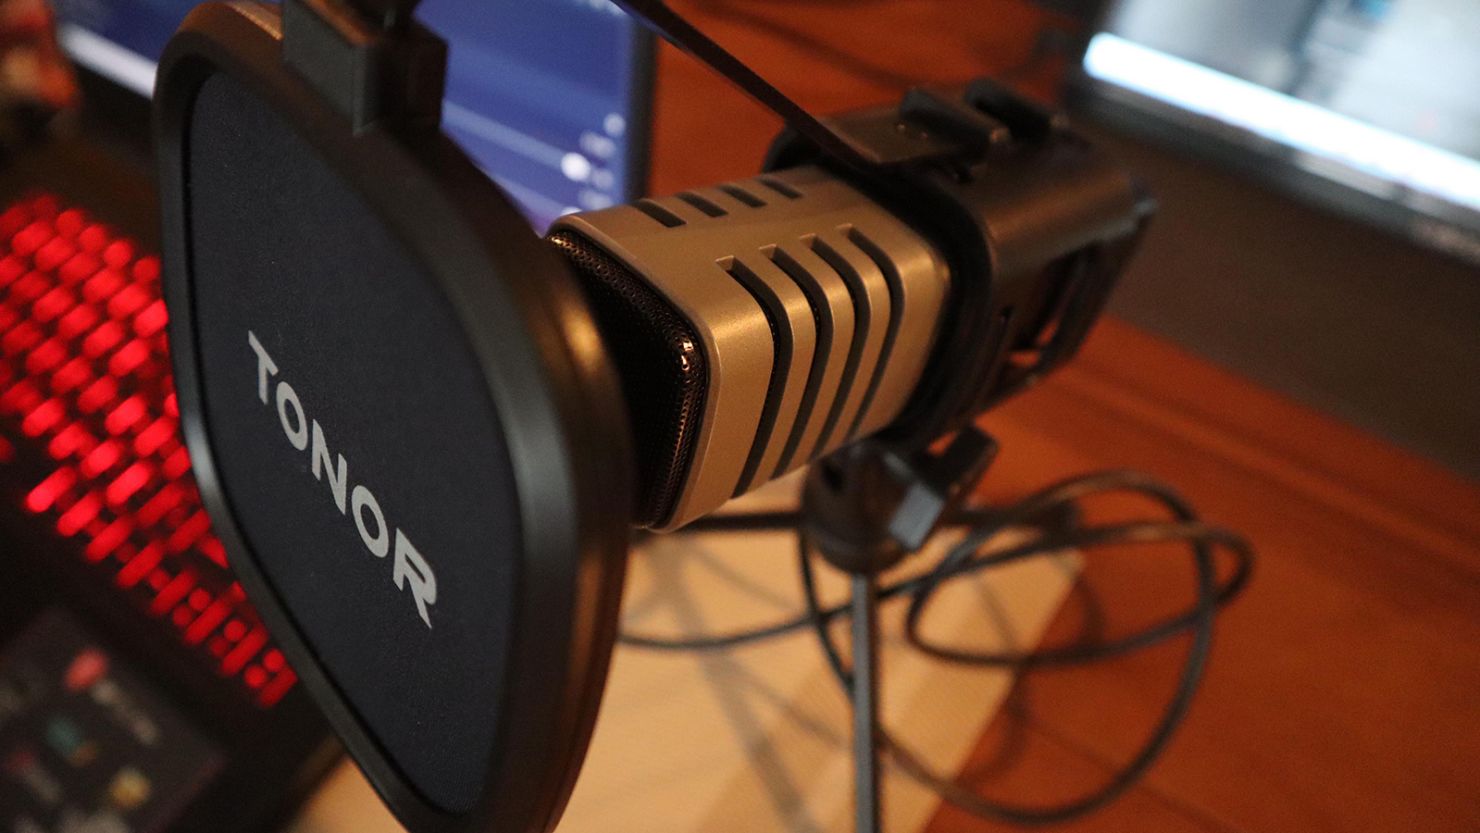 TONOR USB Microphone Guide - Apps on Google Play